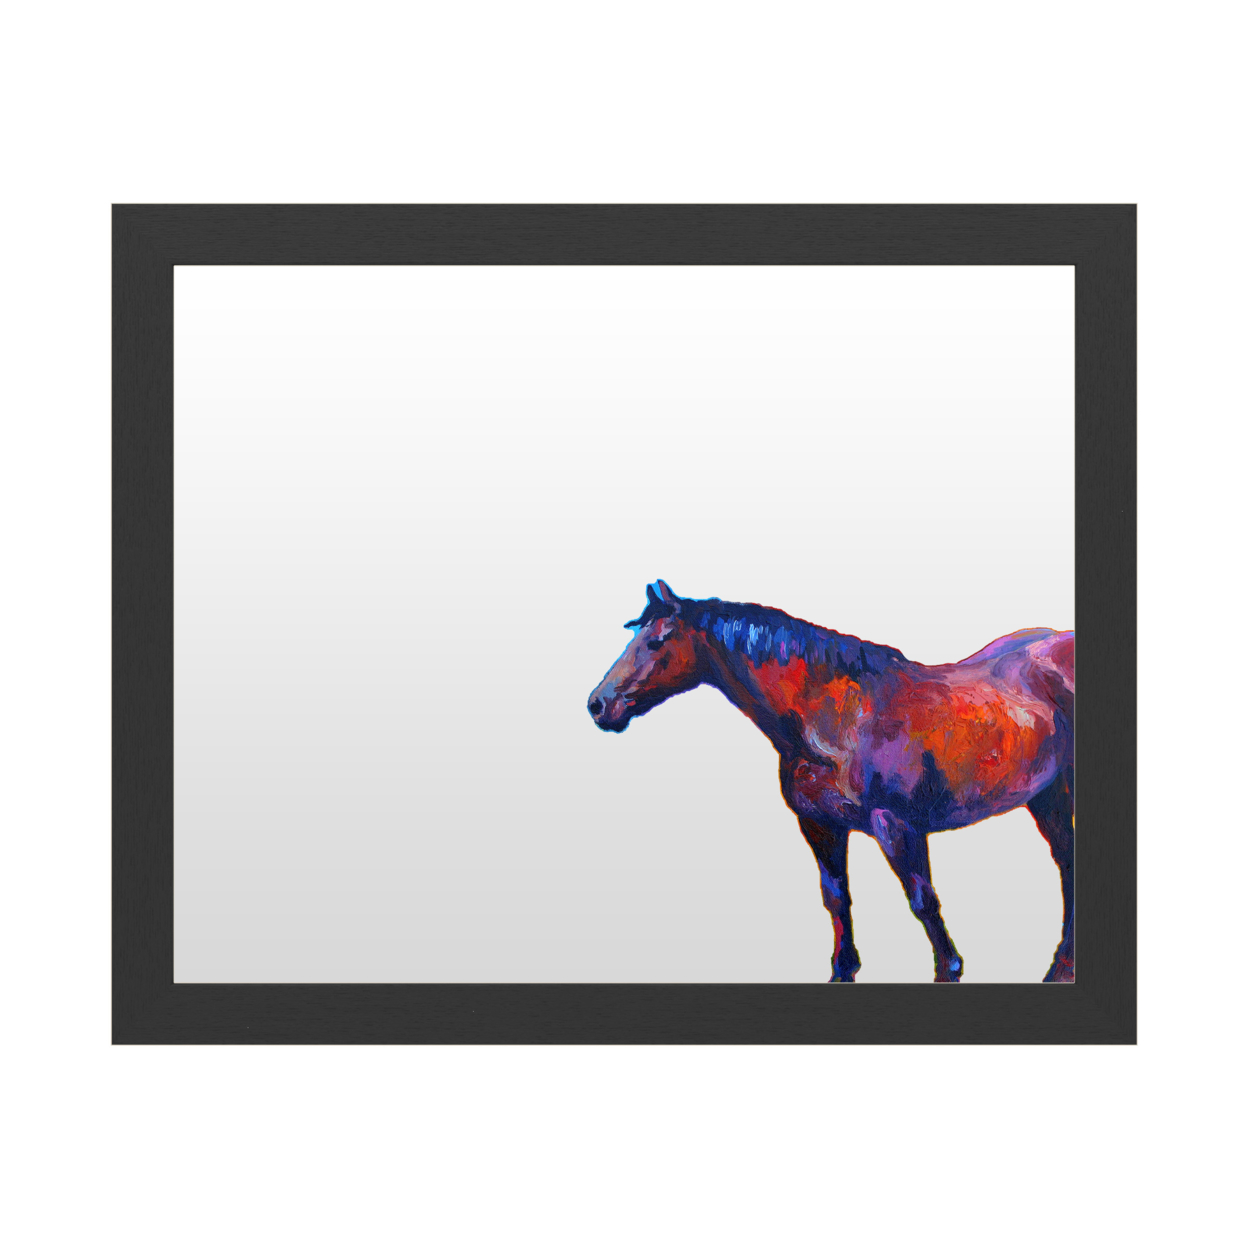 Dry Erase 16 X 20 Marker Board With Printed Artwork - Marion Rose Bay Mare I White Board - Ready To Hang